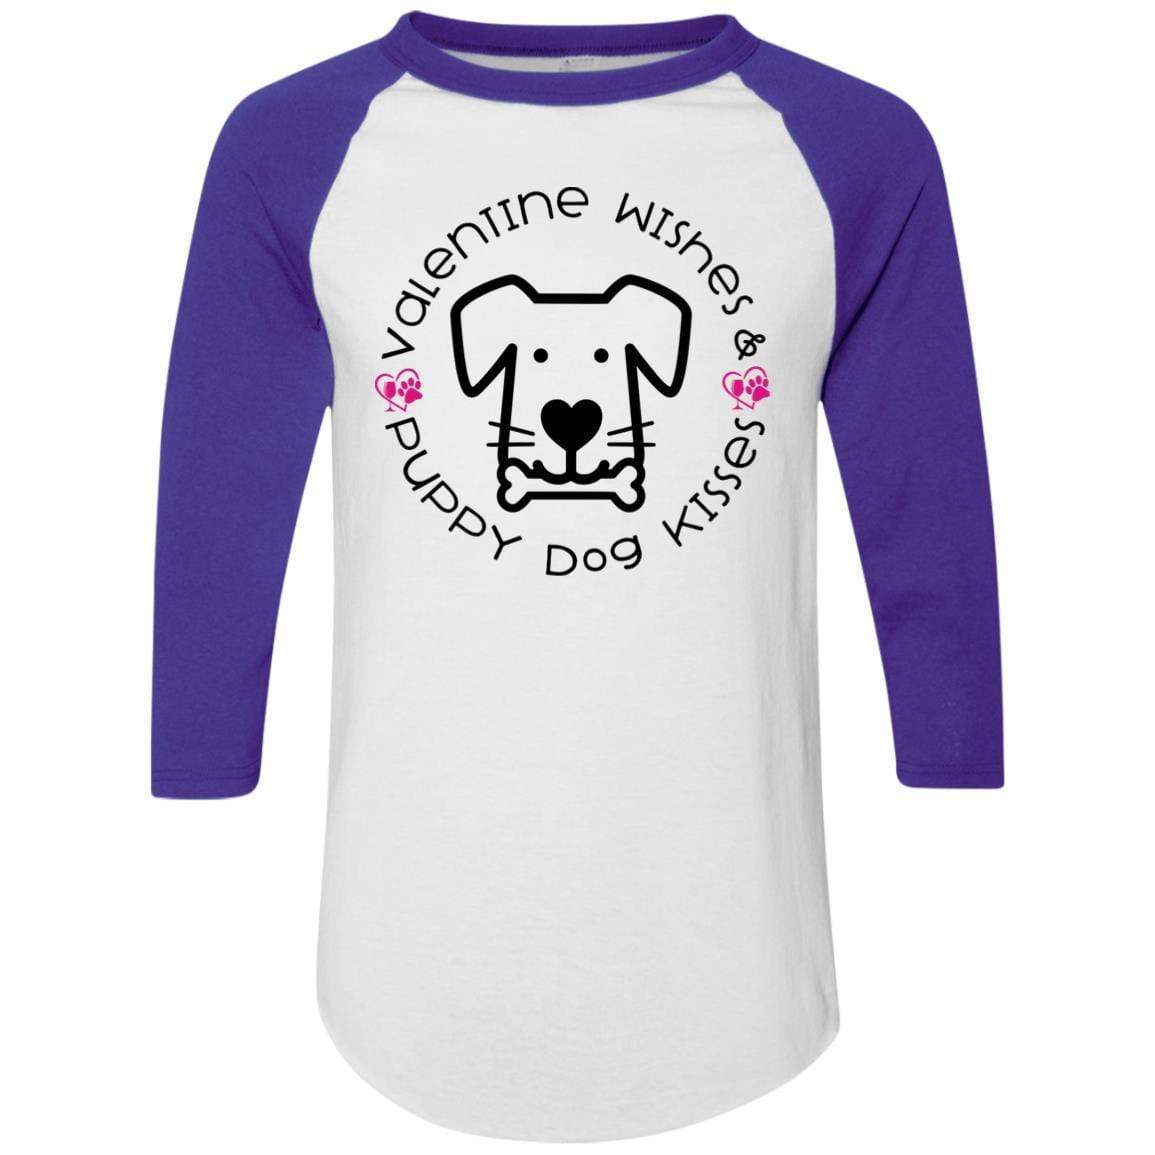 T-Shirts White/Purple / S Winey Bitches Co 'Valentine Wishes and Puppy Dog Kisses" (Dog) Colorblock Raglan Jersey WineyBitchesCo